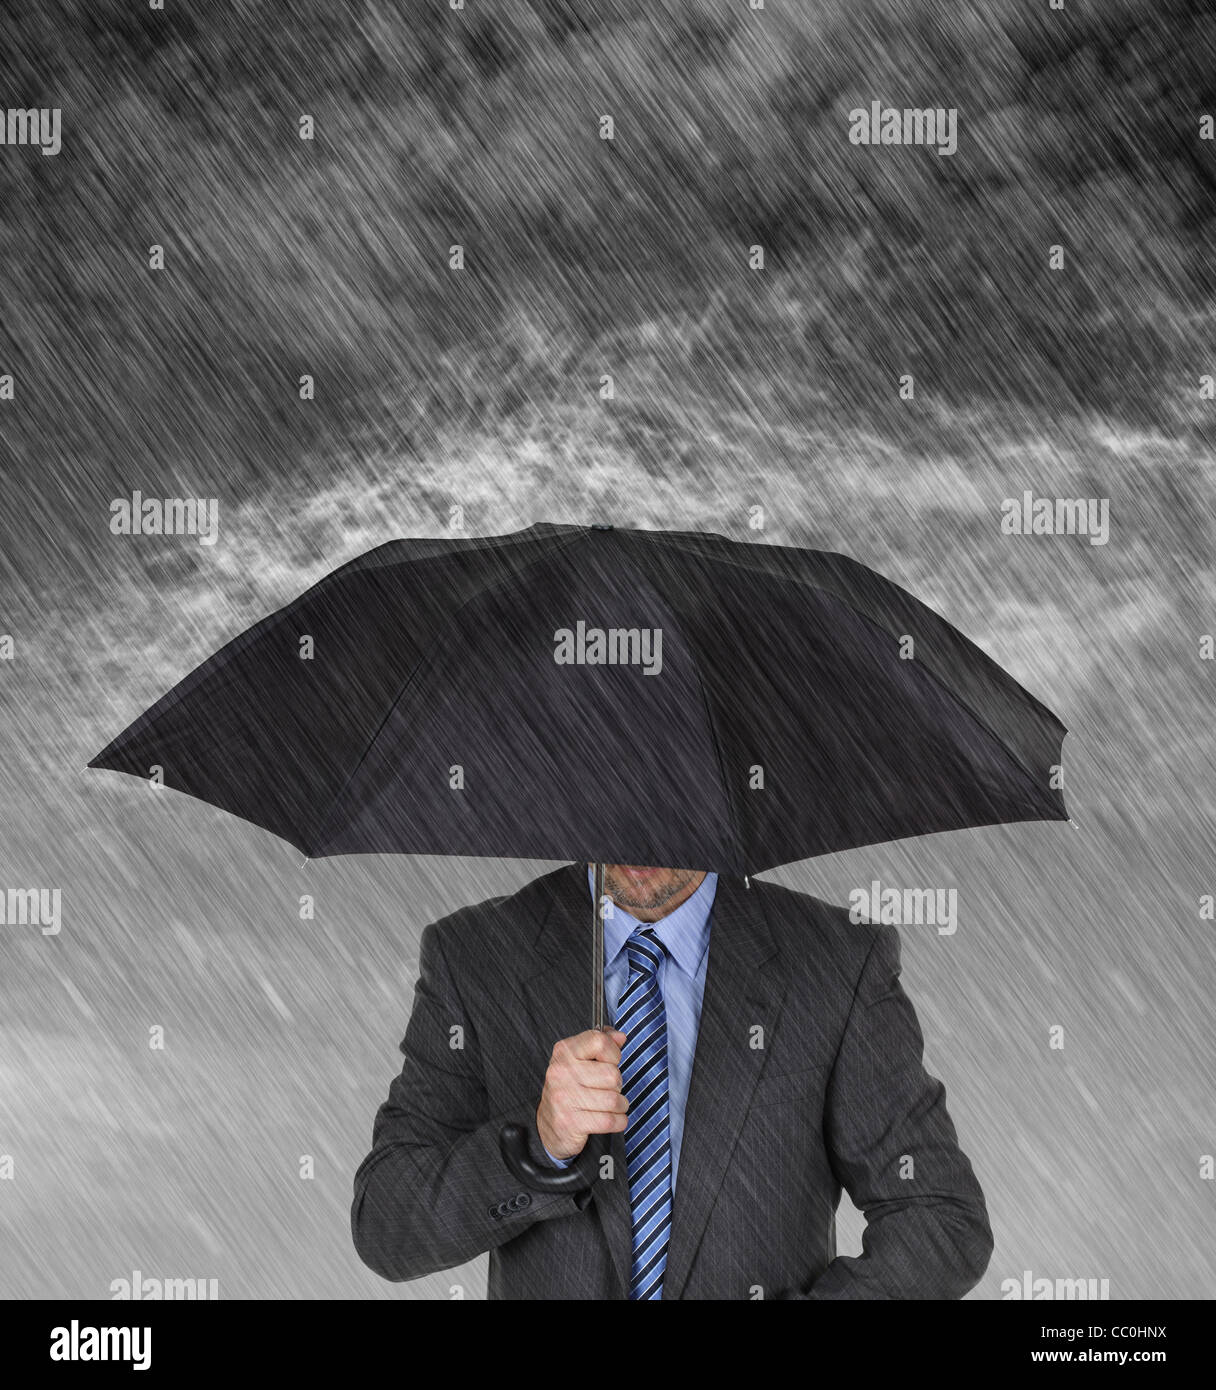 Businessman sheltering from the rain Stock Photo